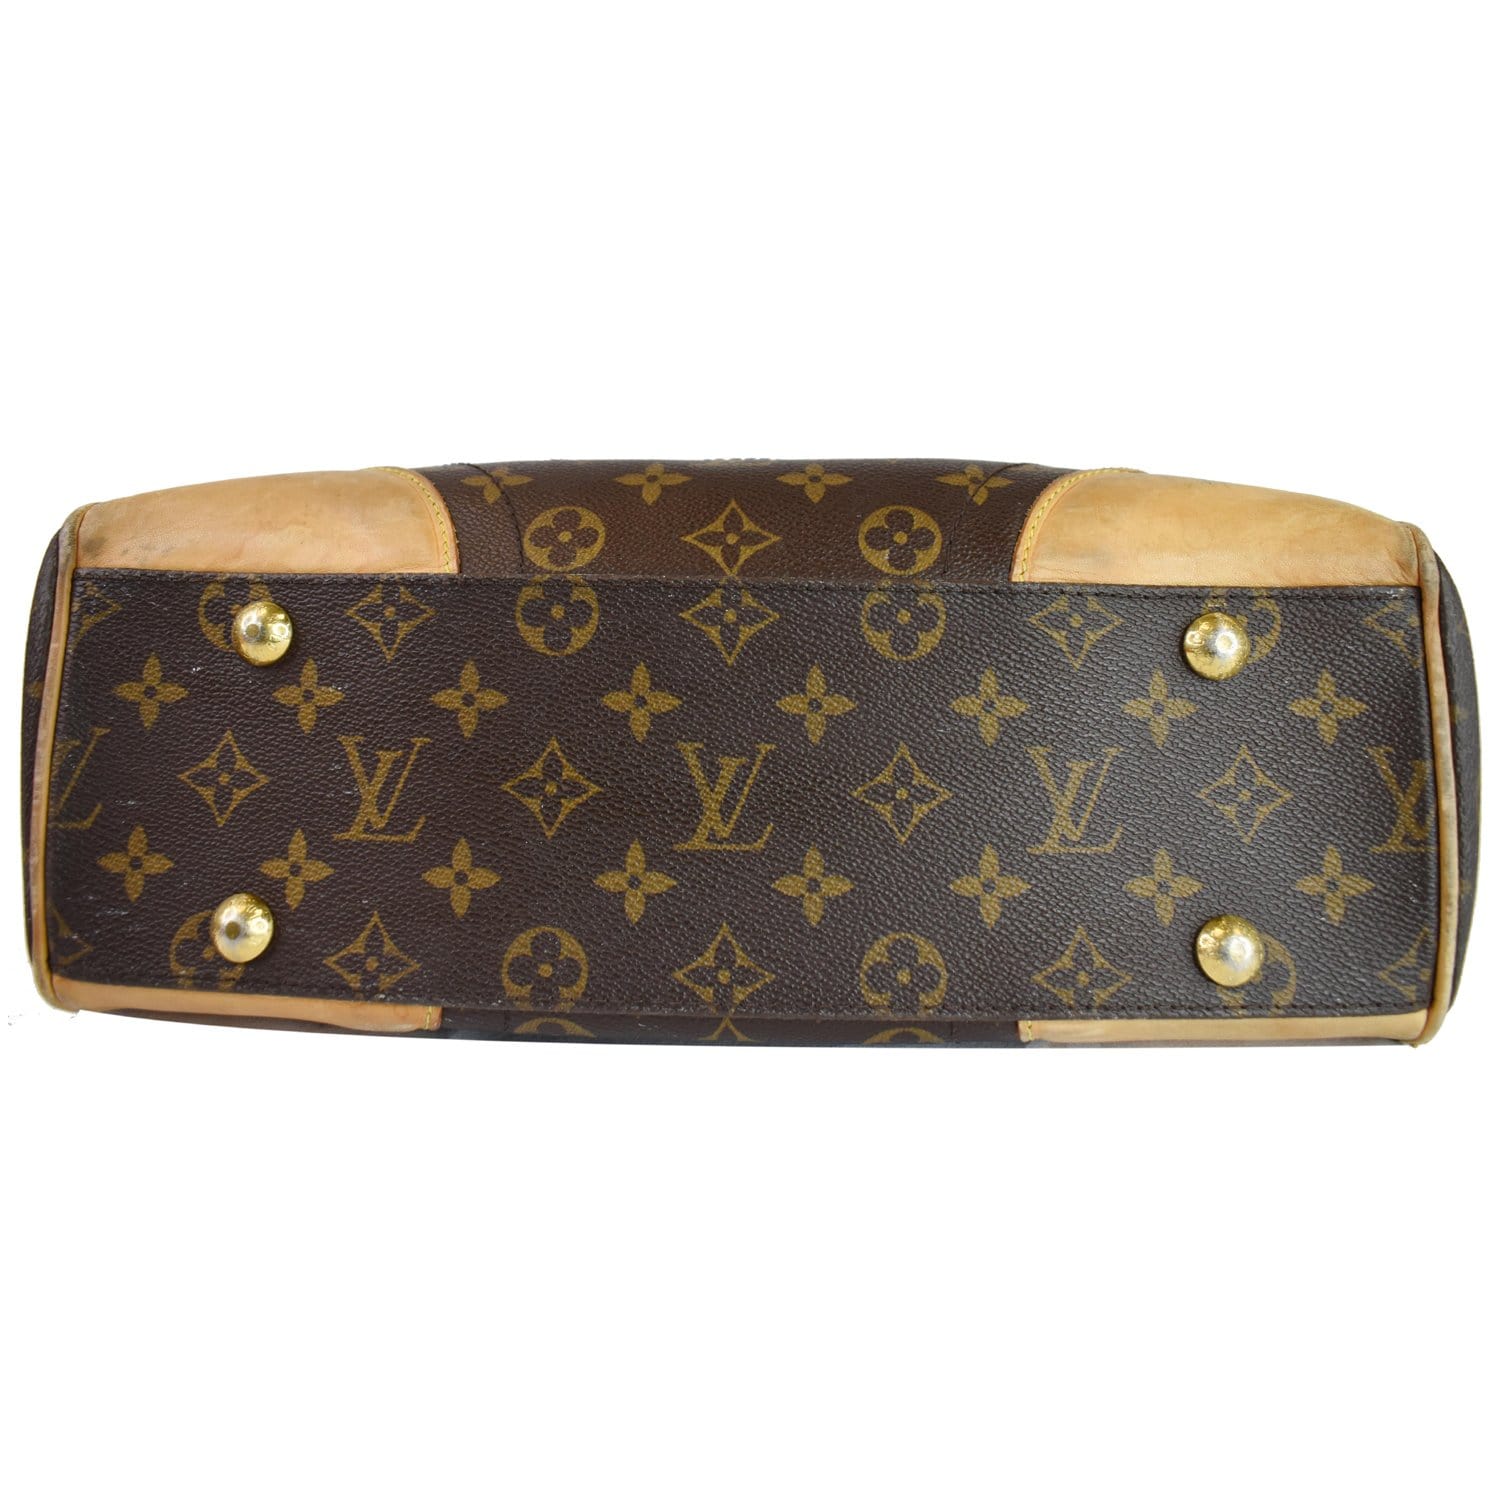 Louis Vuitton Monogram Canvas Beverly Mm At Jill's Consignment